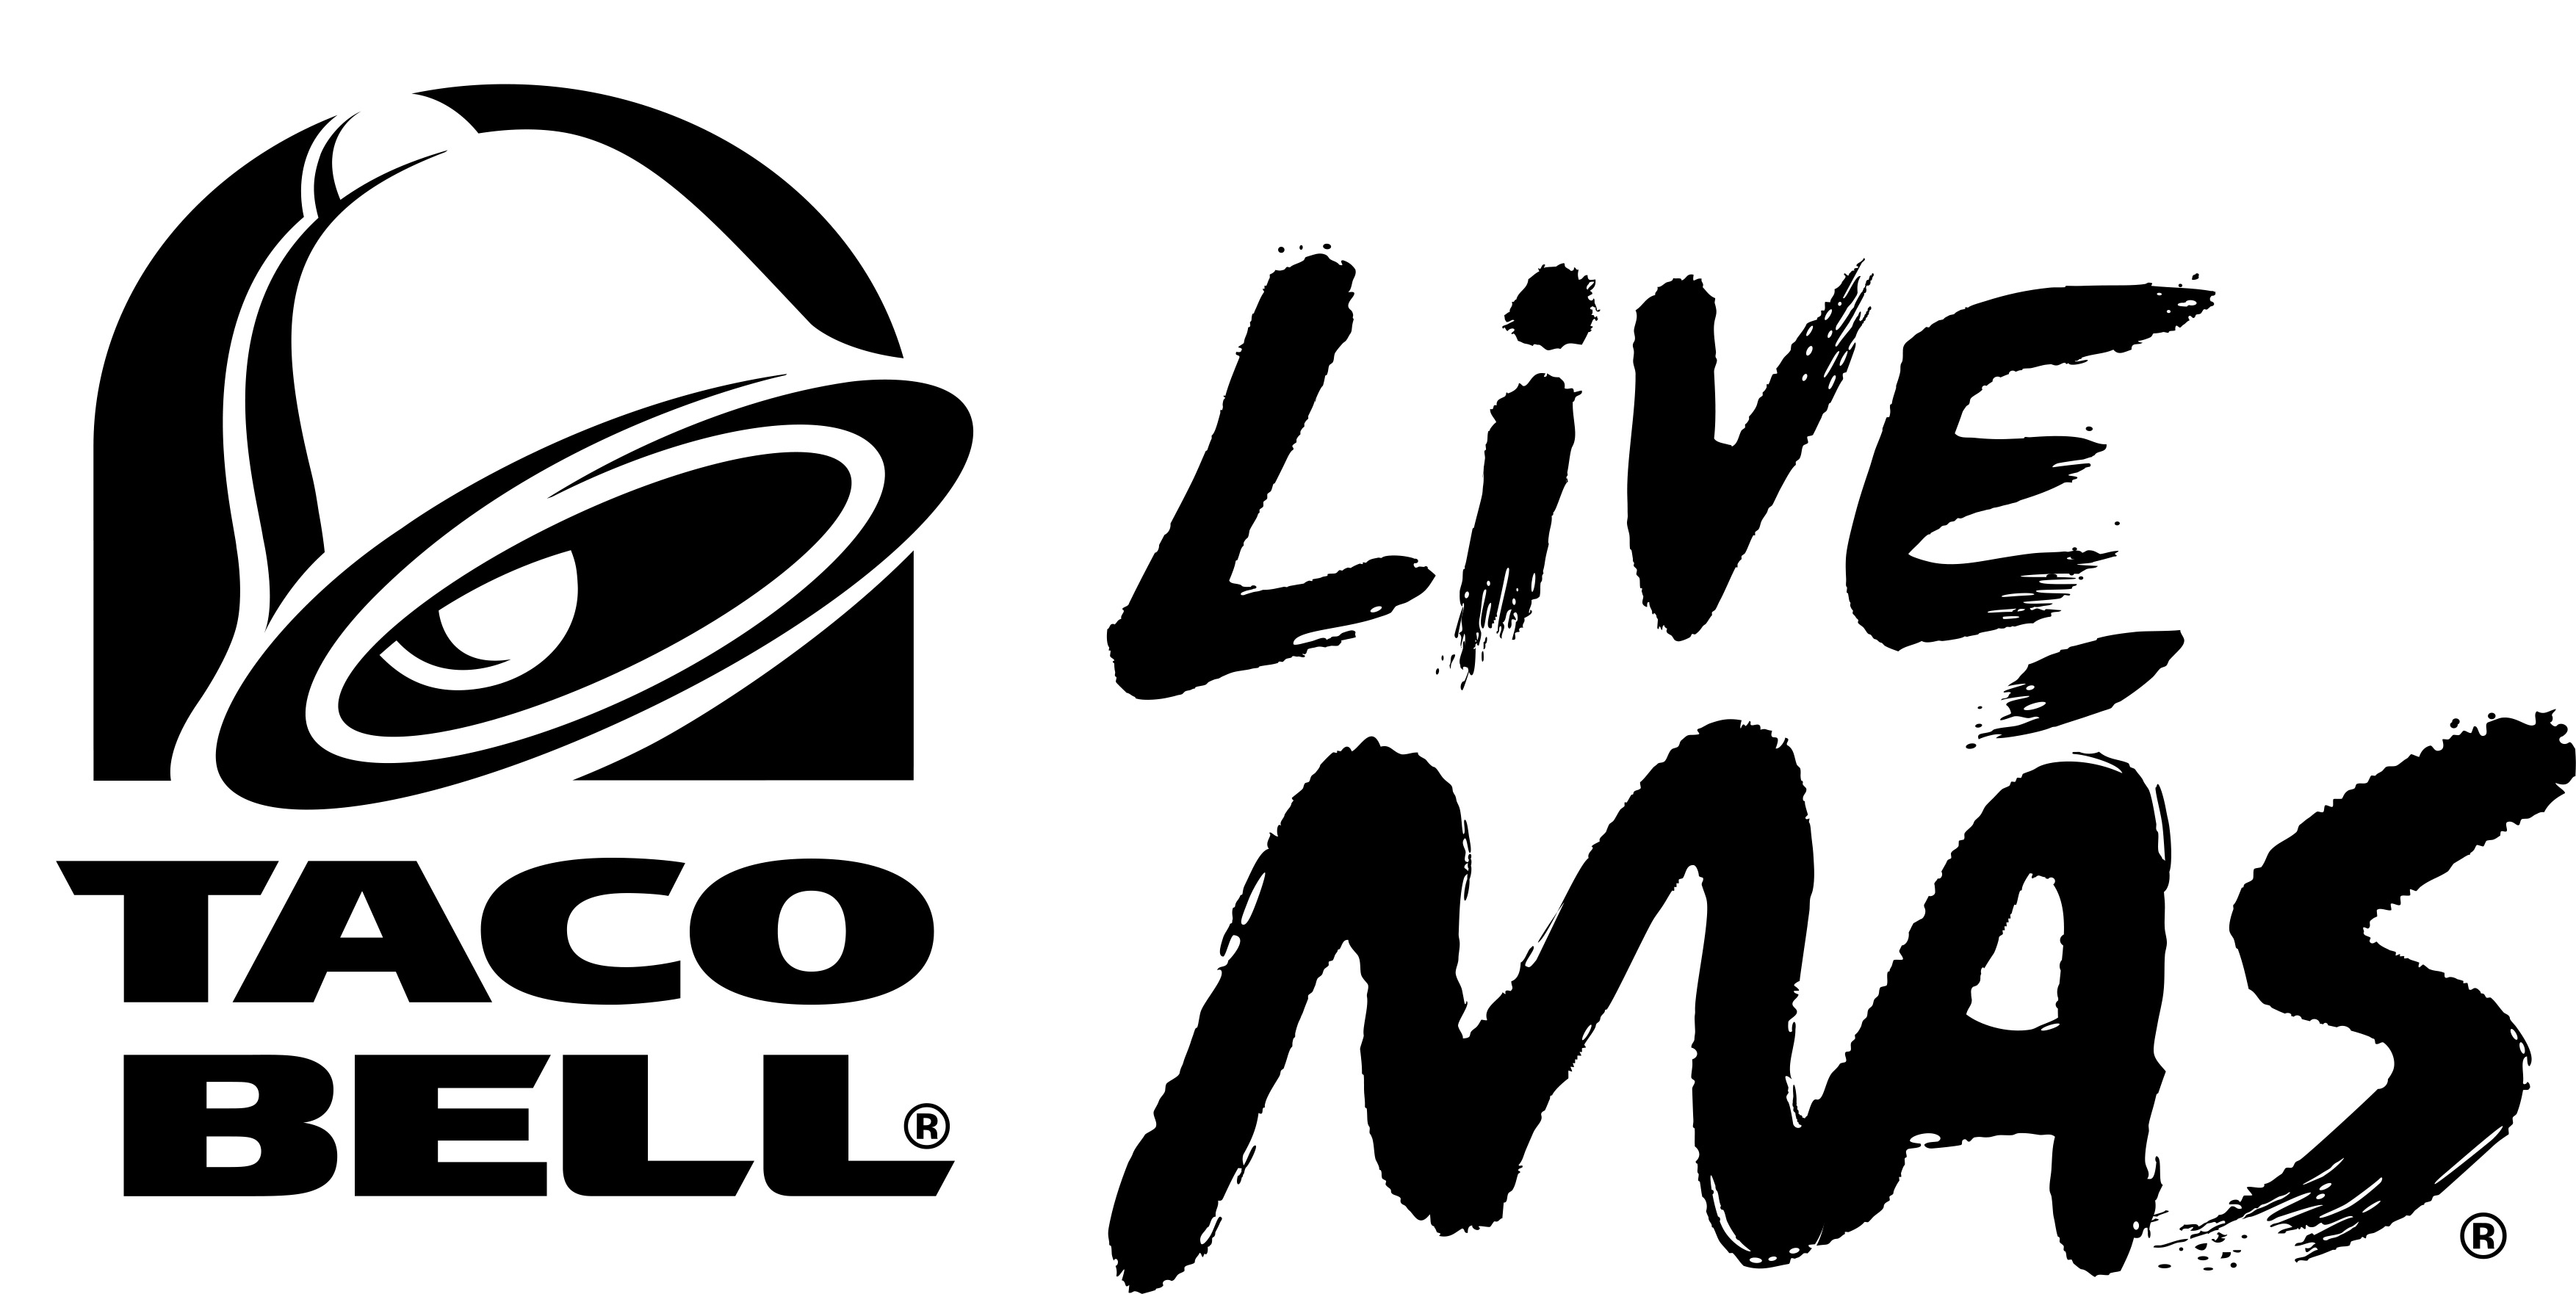 Taco Bell Logo Logospike Famous And Vector Logos